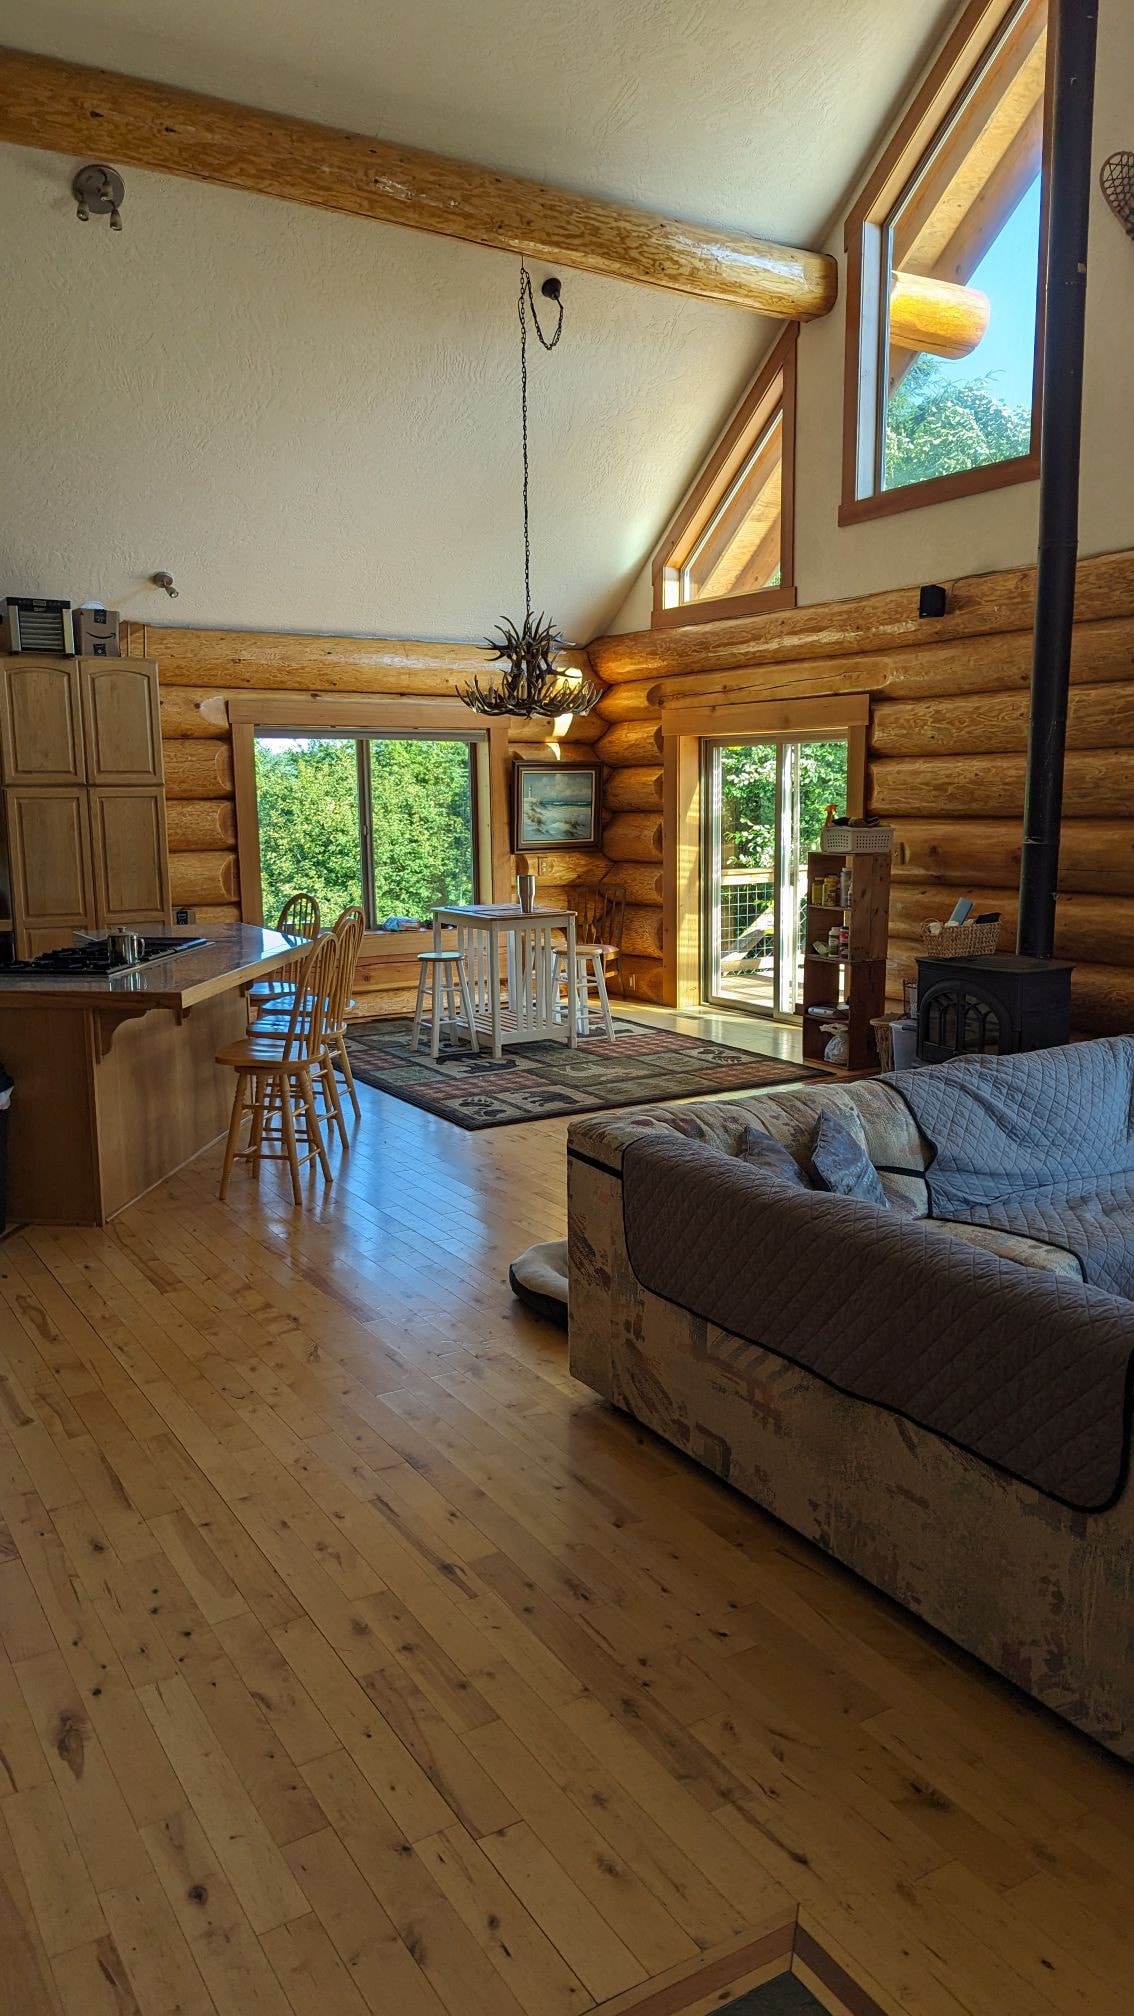 Mt. View Cabin in the woods